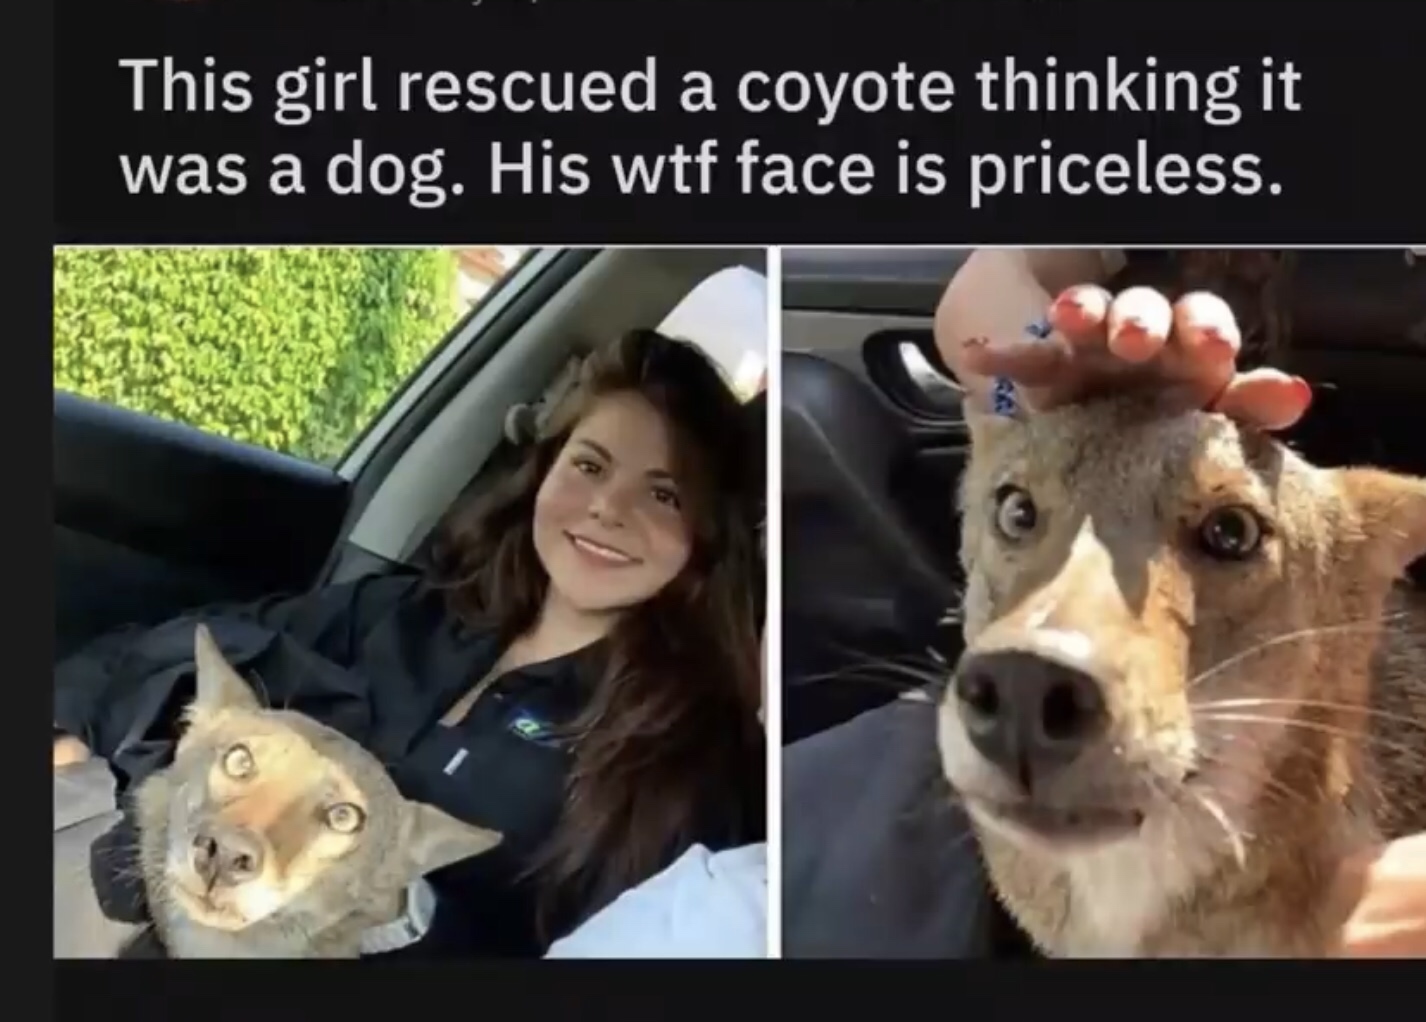 woman rescues coyote - This girl rescued a coyote thinking it was a dog. His wtf face is priceless.